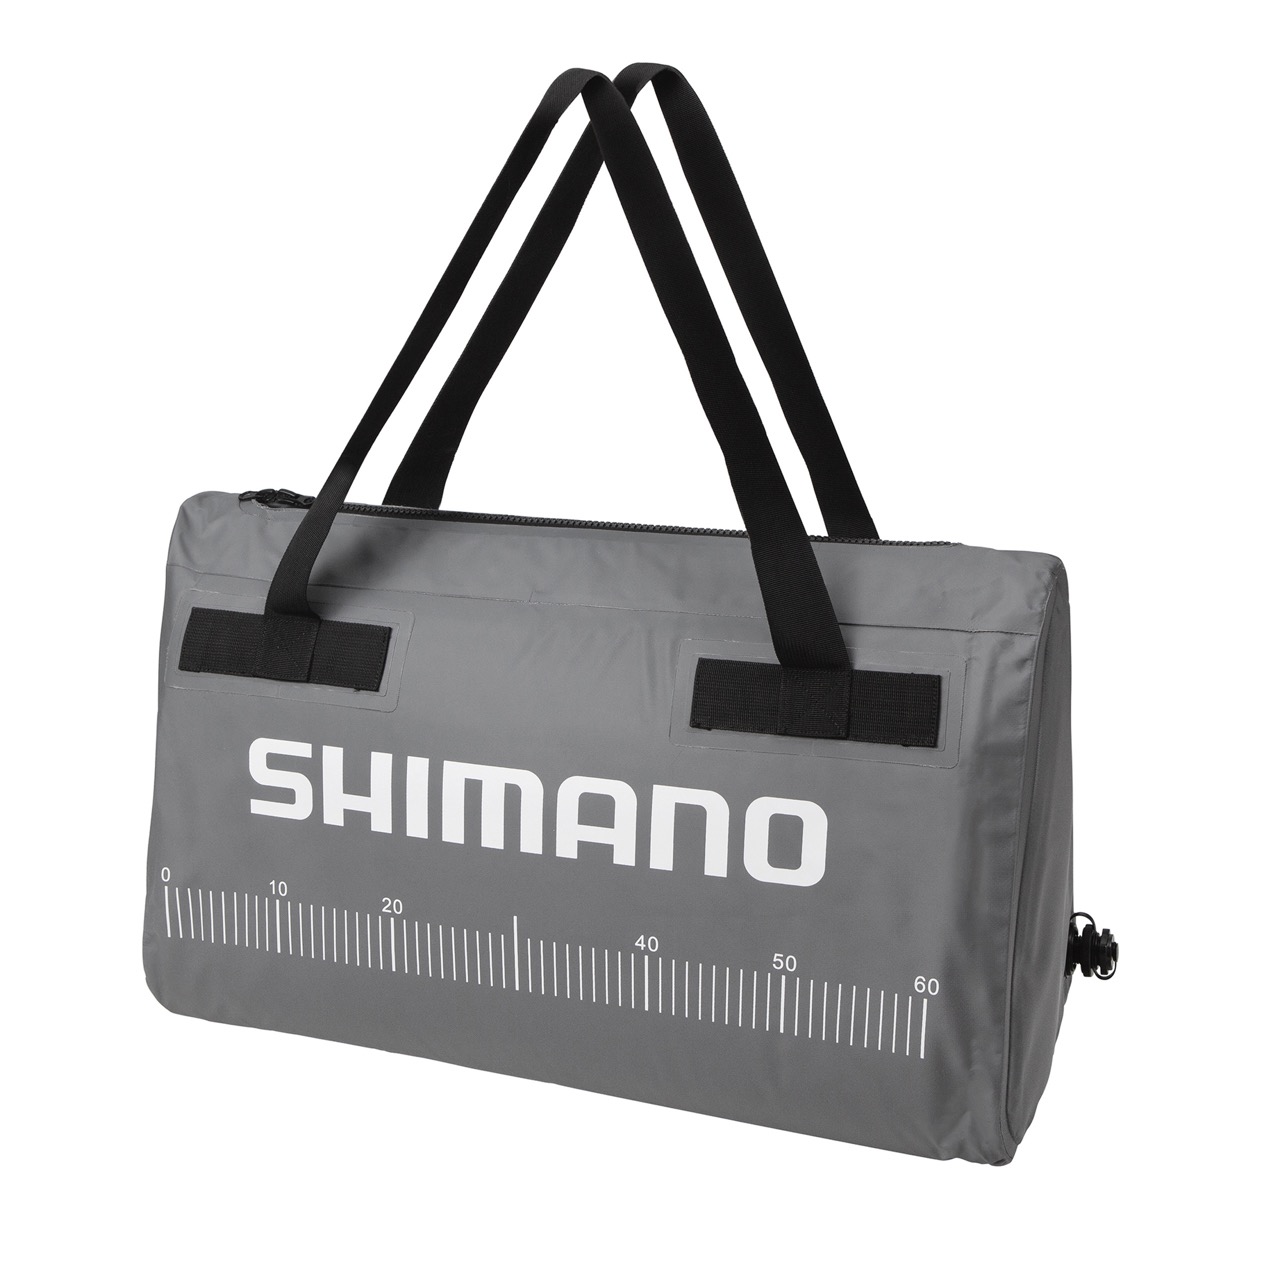 Shimano Insulated Fish Bag 700mm - Buy from NZ owned businesses - Over  500,000 products available 